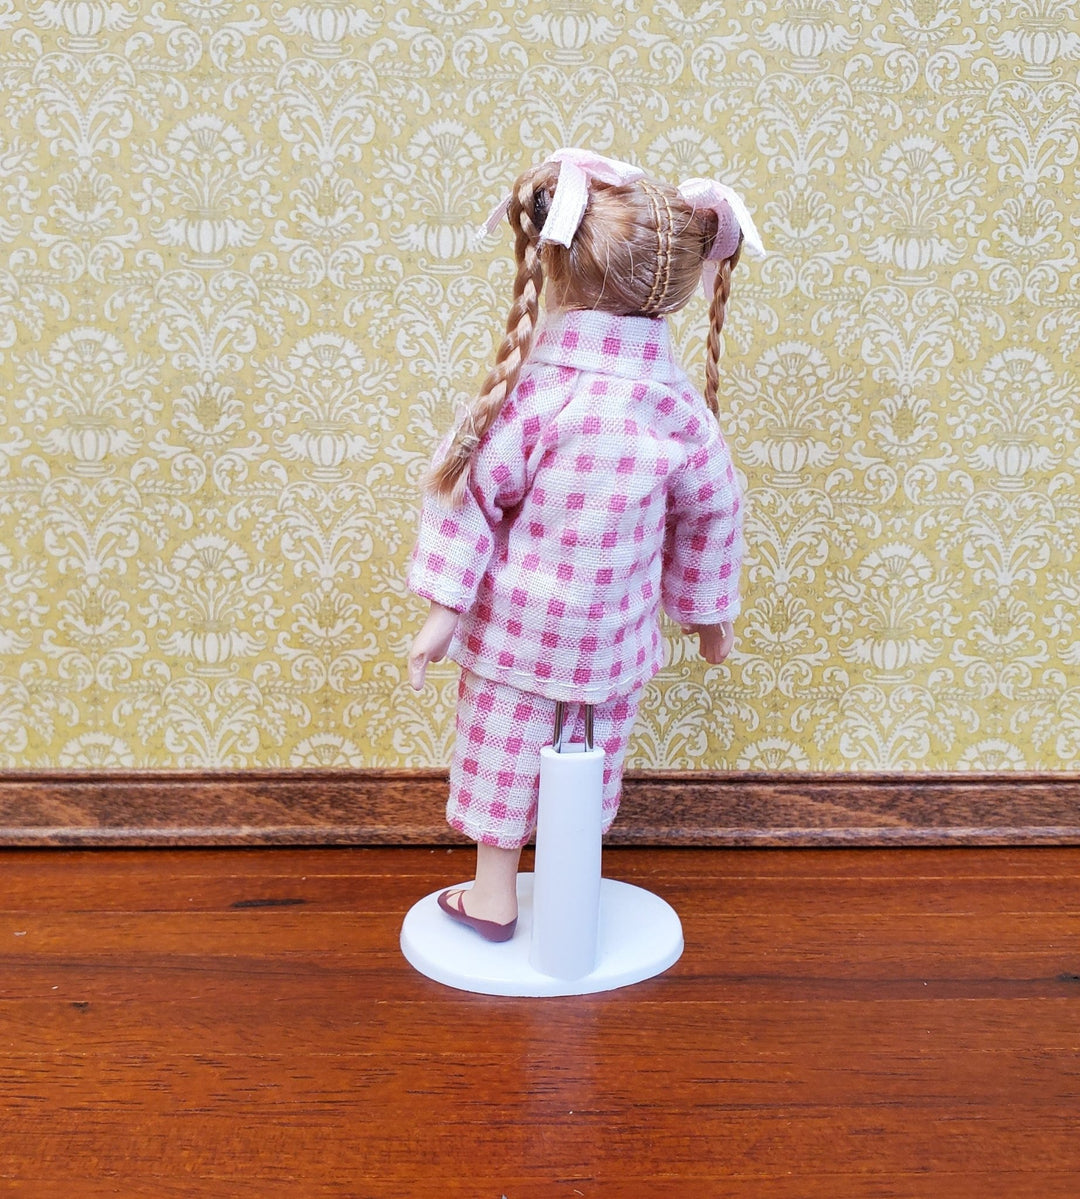 Dollhouse Girl Doll Braids Porcelain Pink & White Checked Outfit 1:12 Scale Miniature - Miniature Crush